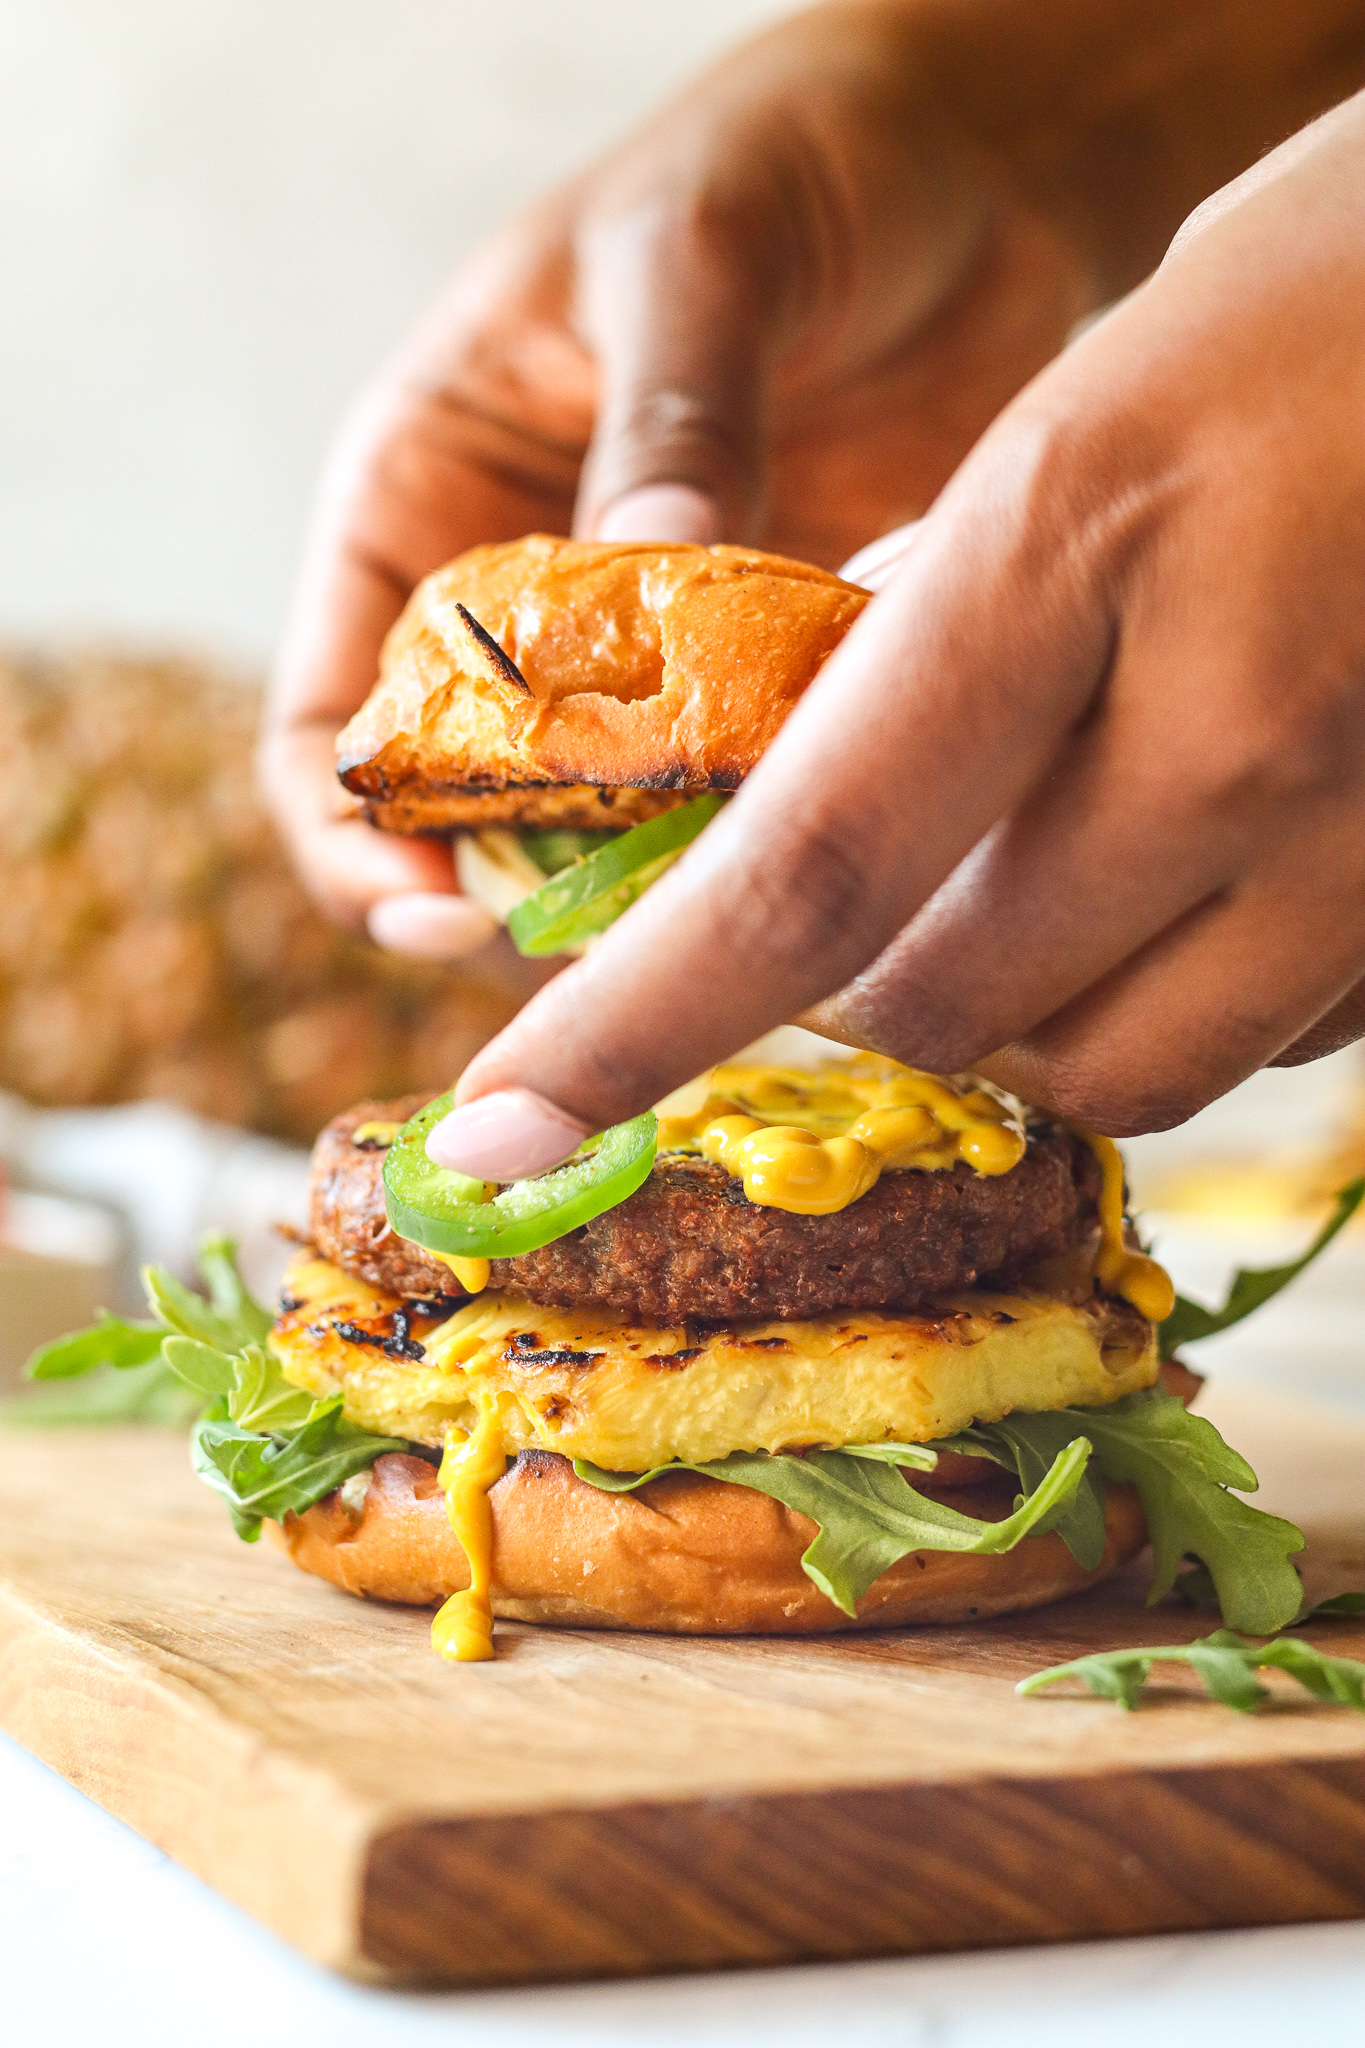 Assemble the Beyond Burger with favorite toppings: mustard, jalapeno, pineapple, arugula